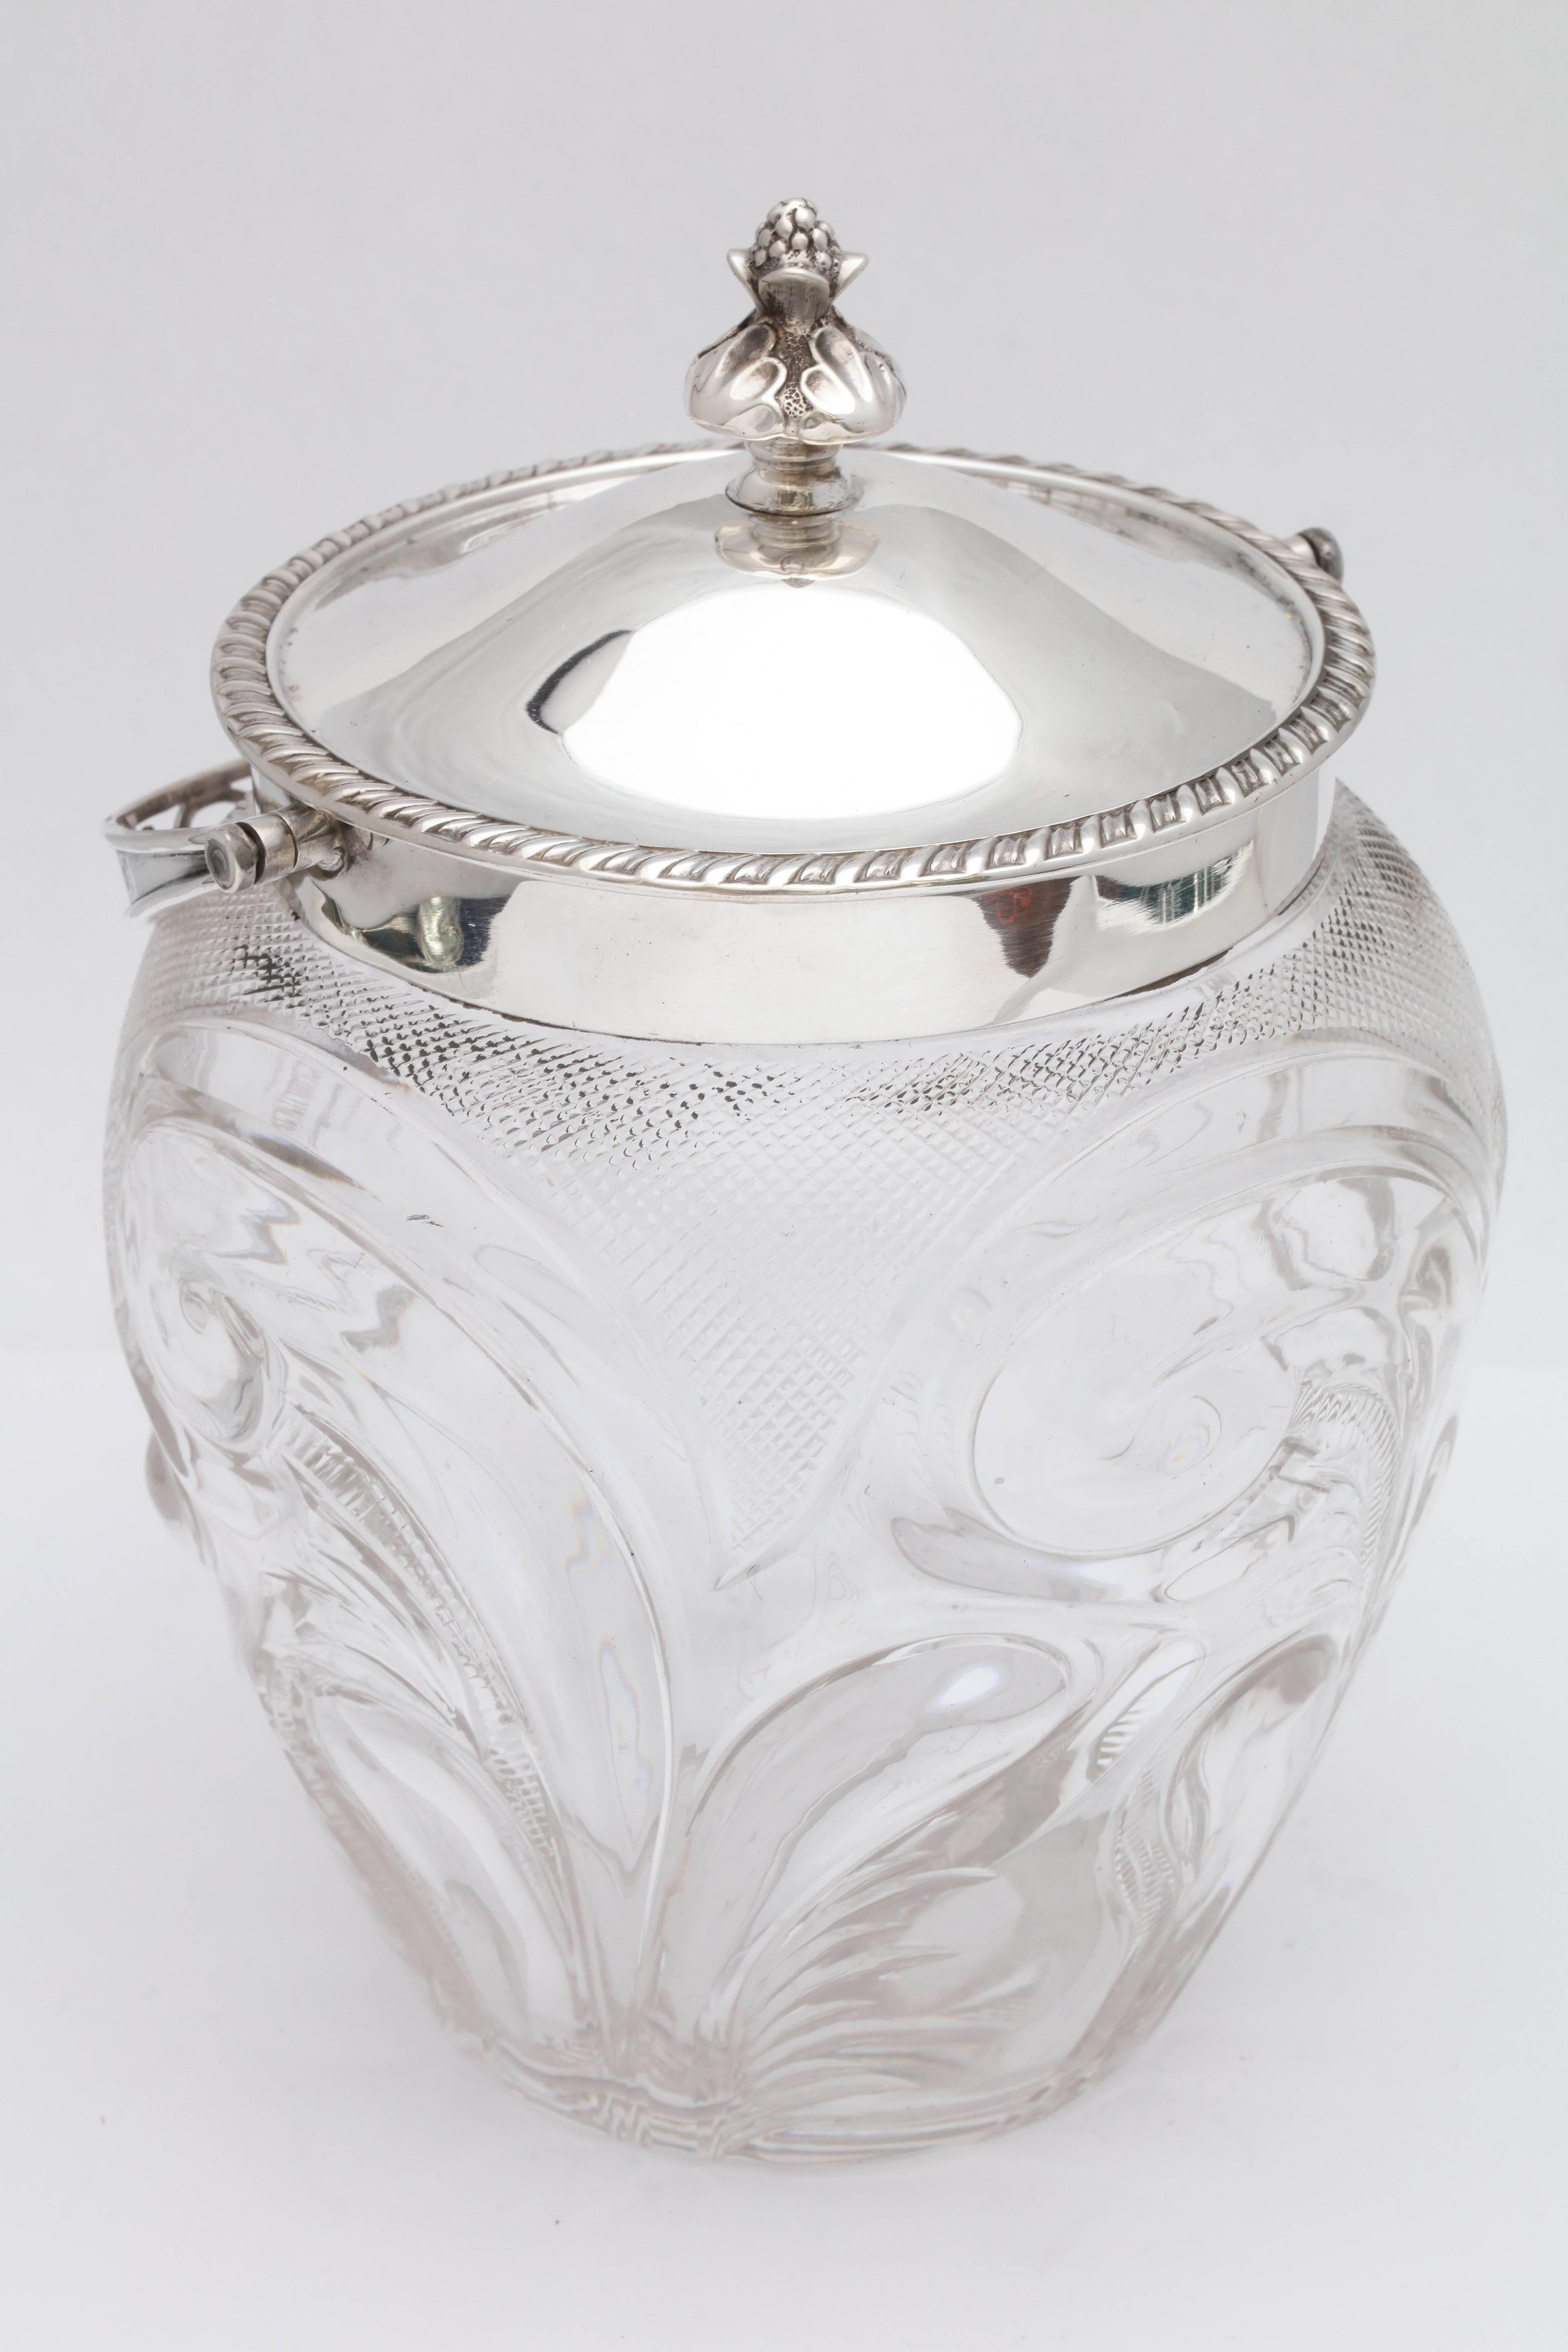 Edwardian, sterling silver-mounted, cut glass biscuit barrel/ice bucket, Sheffield, England, 1901, Walker and Hall - makers. Lovely teardrop shaped barrel has swirled and diamond-cut designs; lid has a reeded border; handle is pierced. Vacant